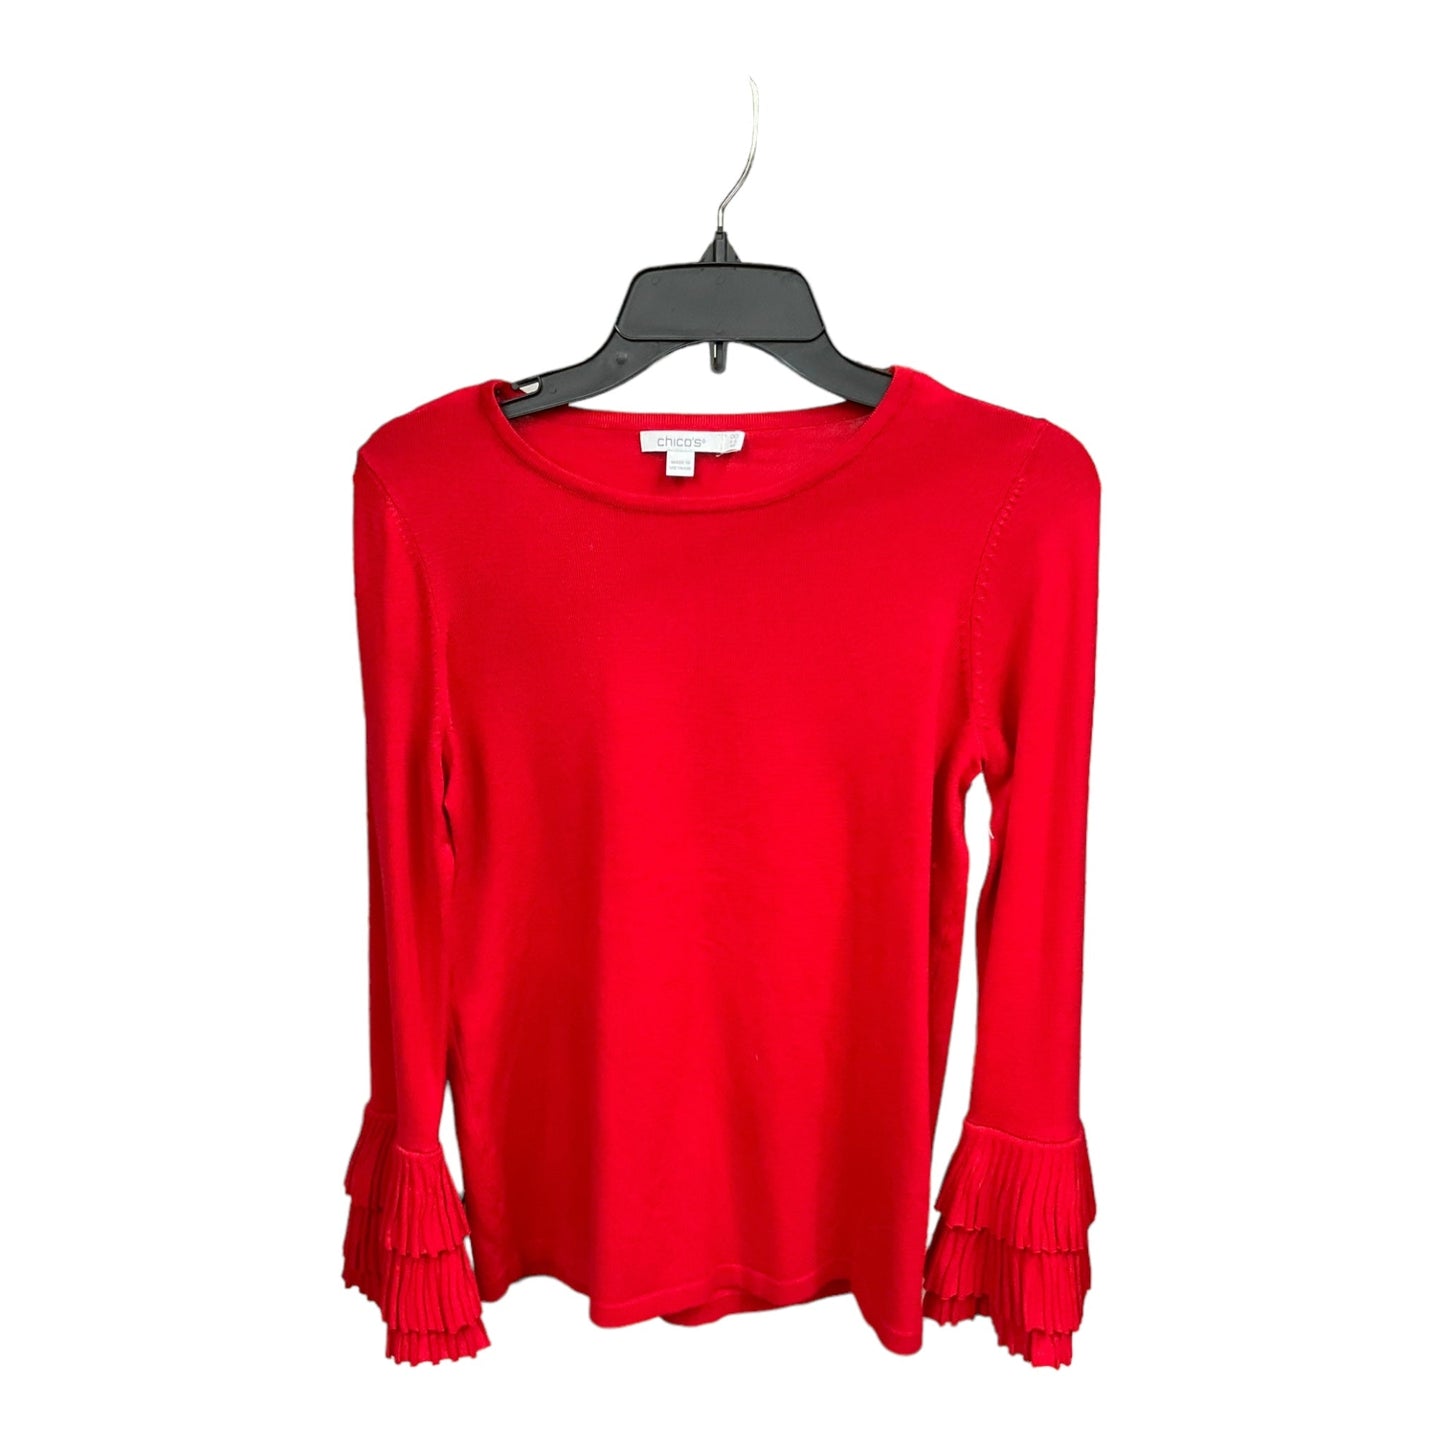 Red Top Long Sleeve Basic Chicos, Size Xs